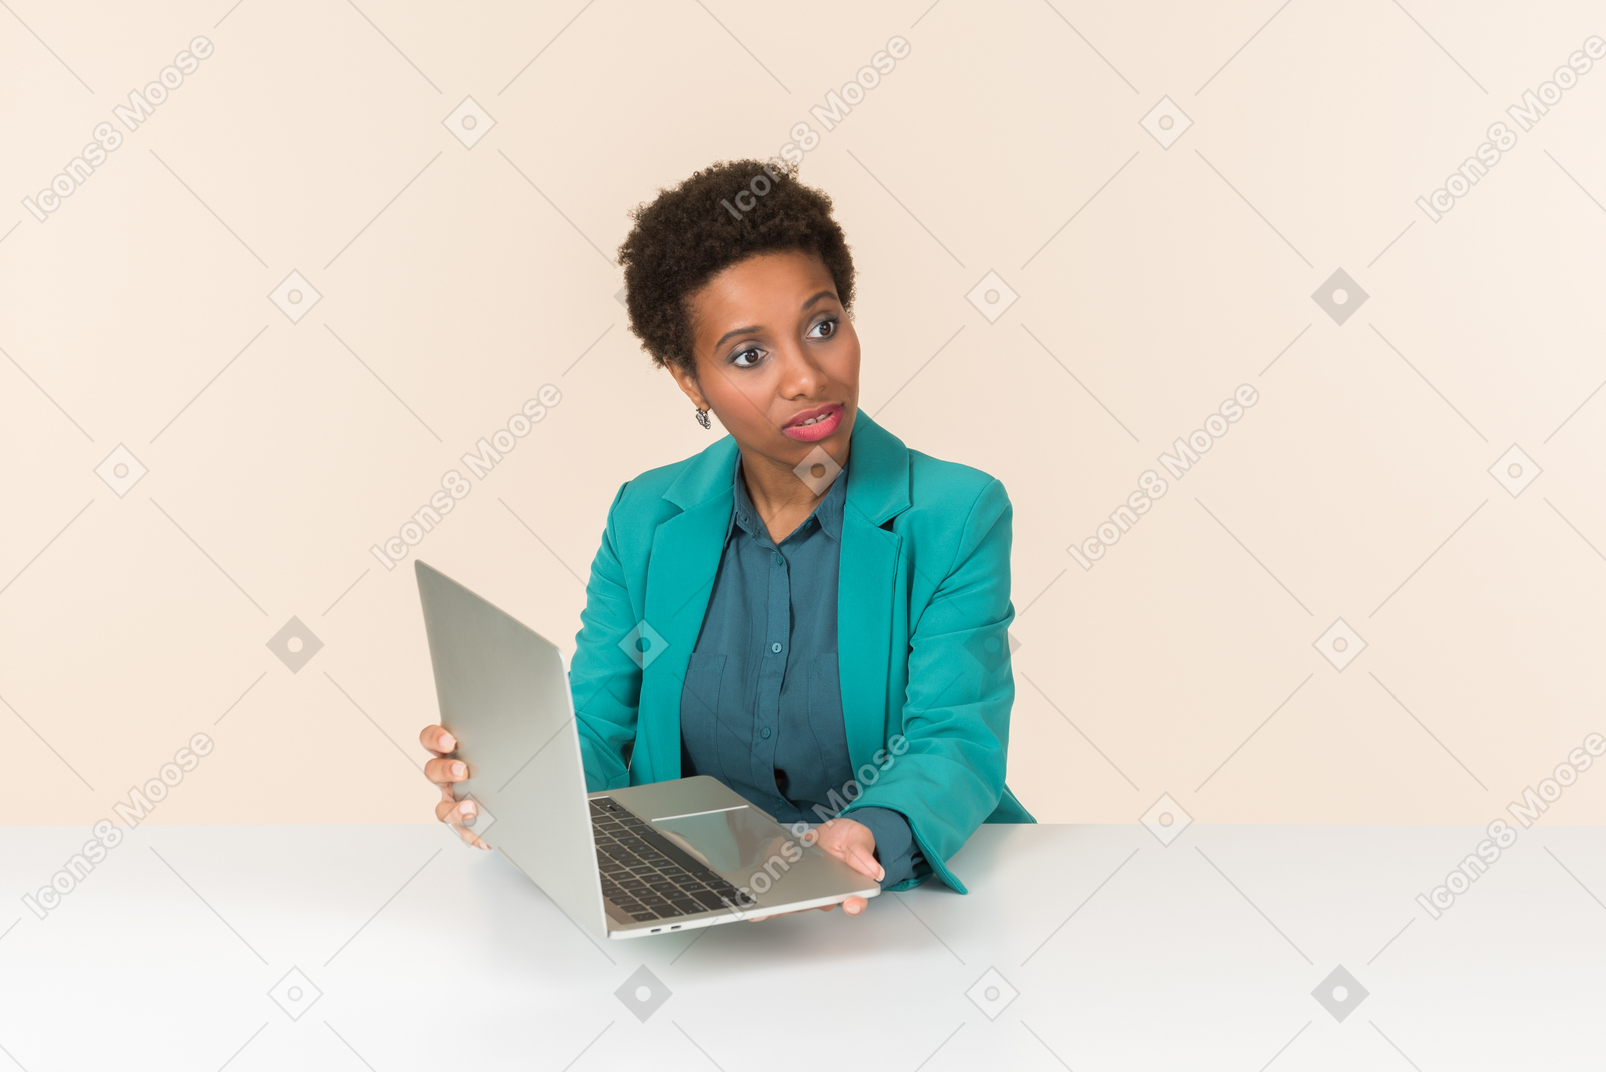 Young female office worker pointing at the laptop